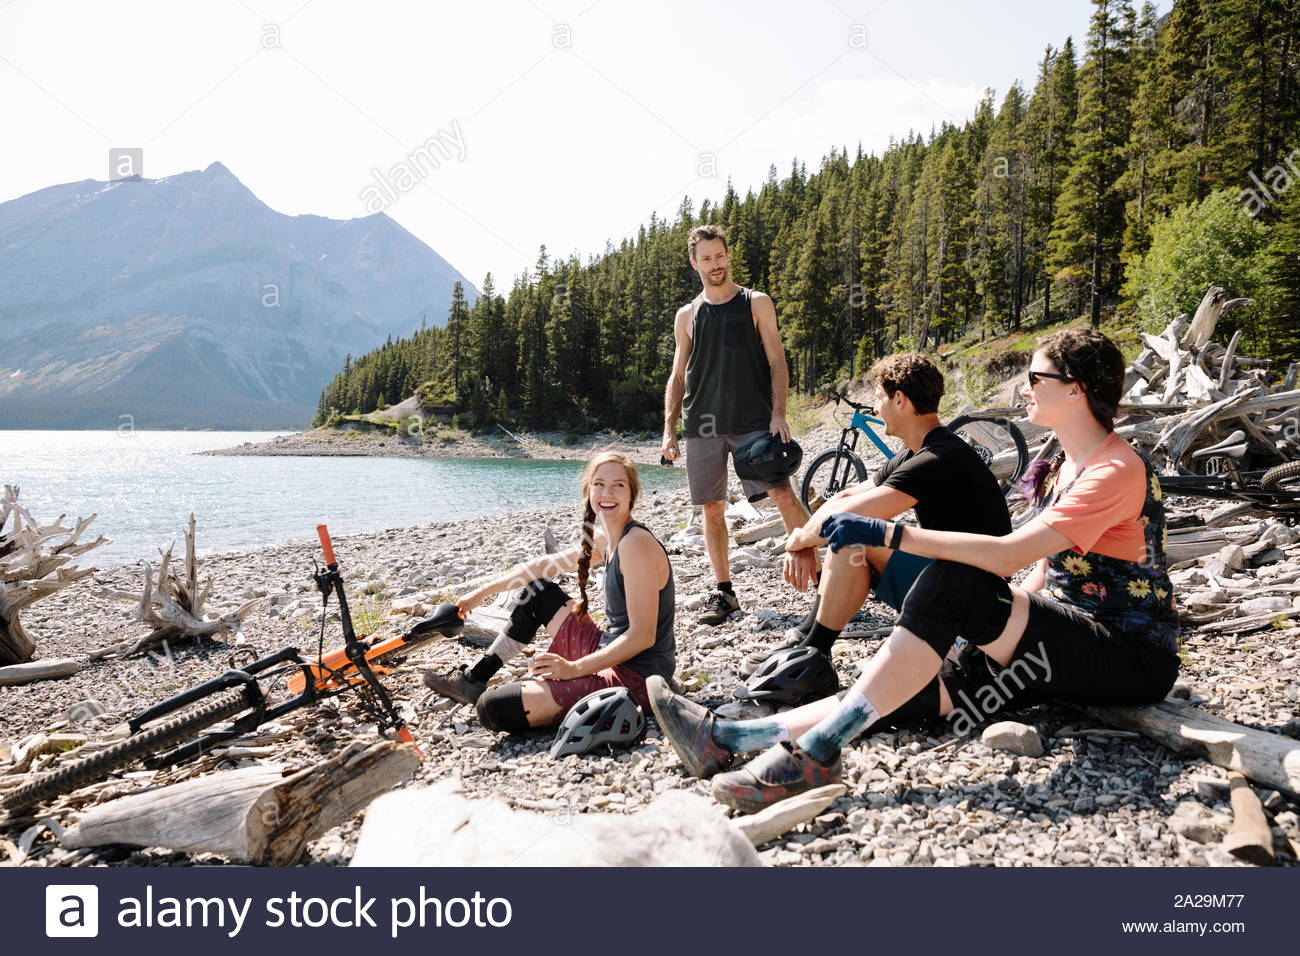 Friends relaxing, taking a break from mountain biking at sunny lakeside Stock Photo